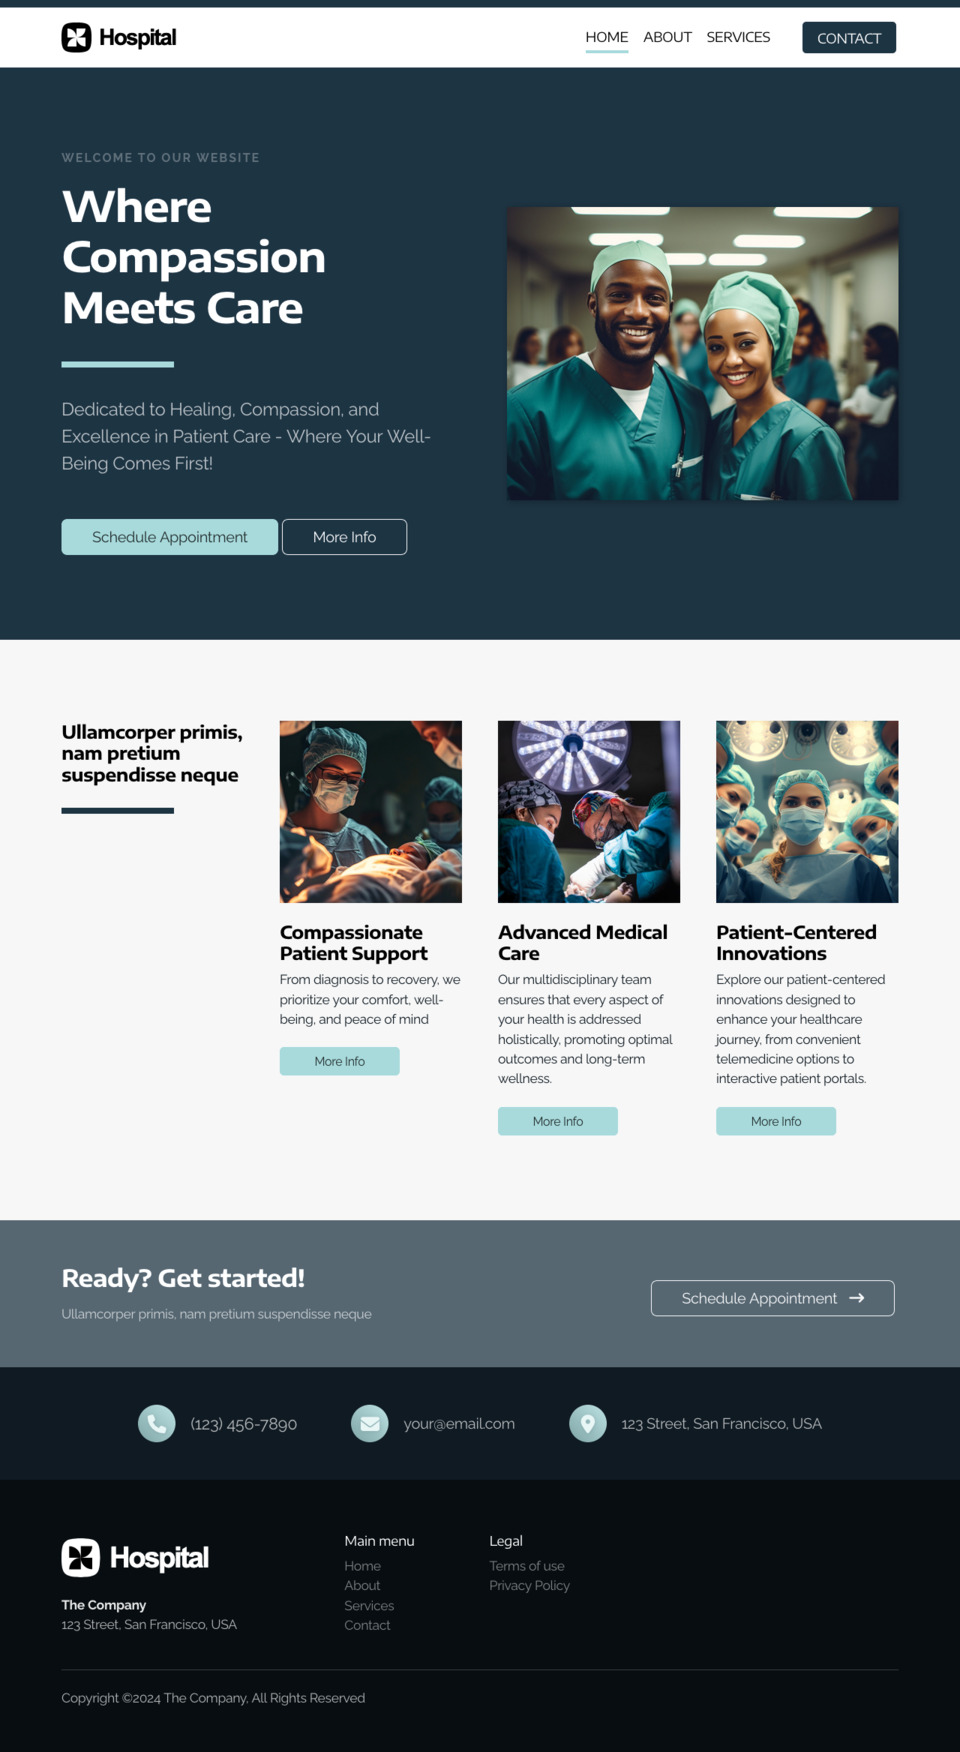 Hospital Website Template - Perfect for hospitals, medical centers, labs, clinics, and any healthcare-related business.